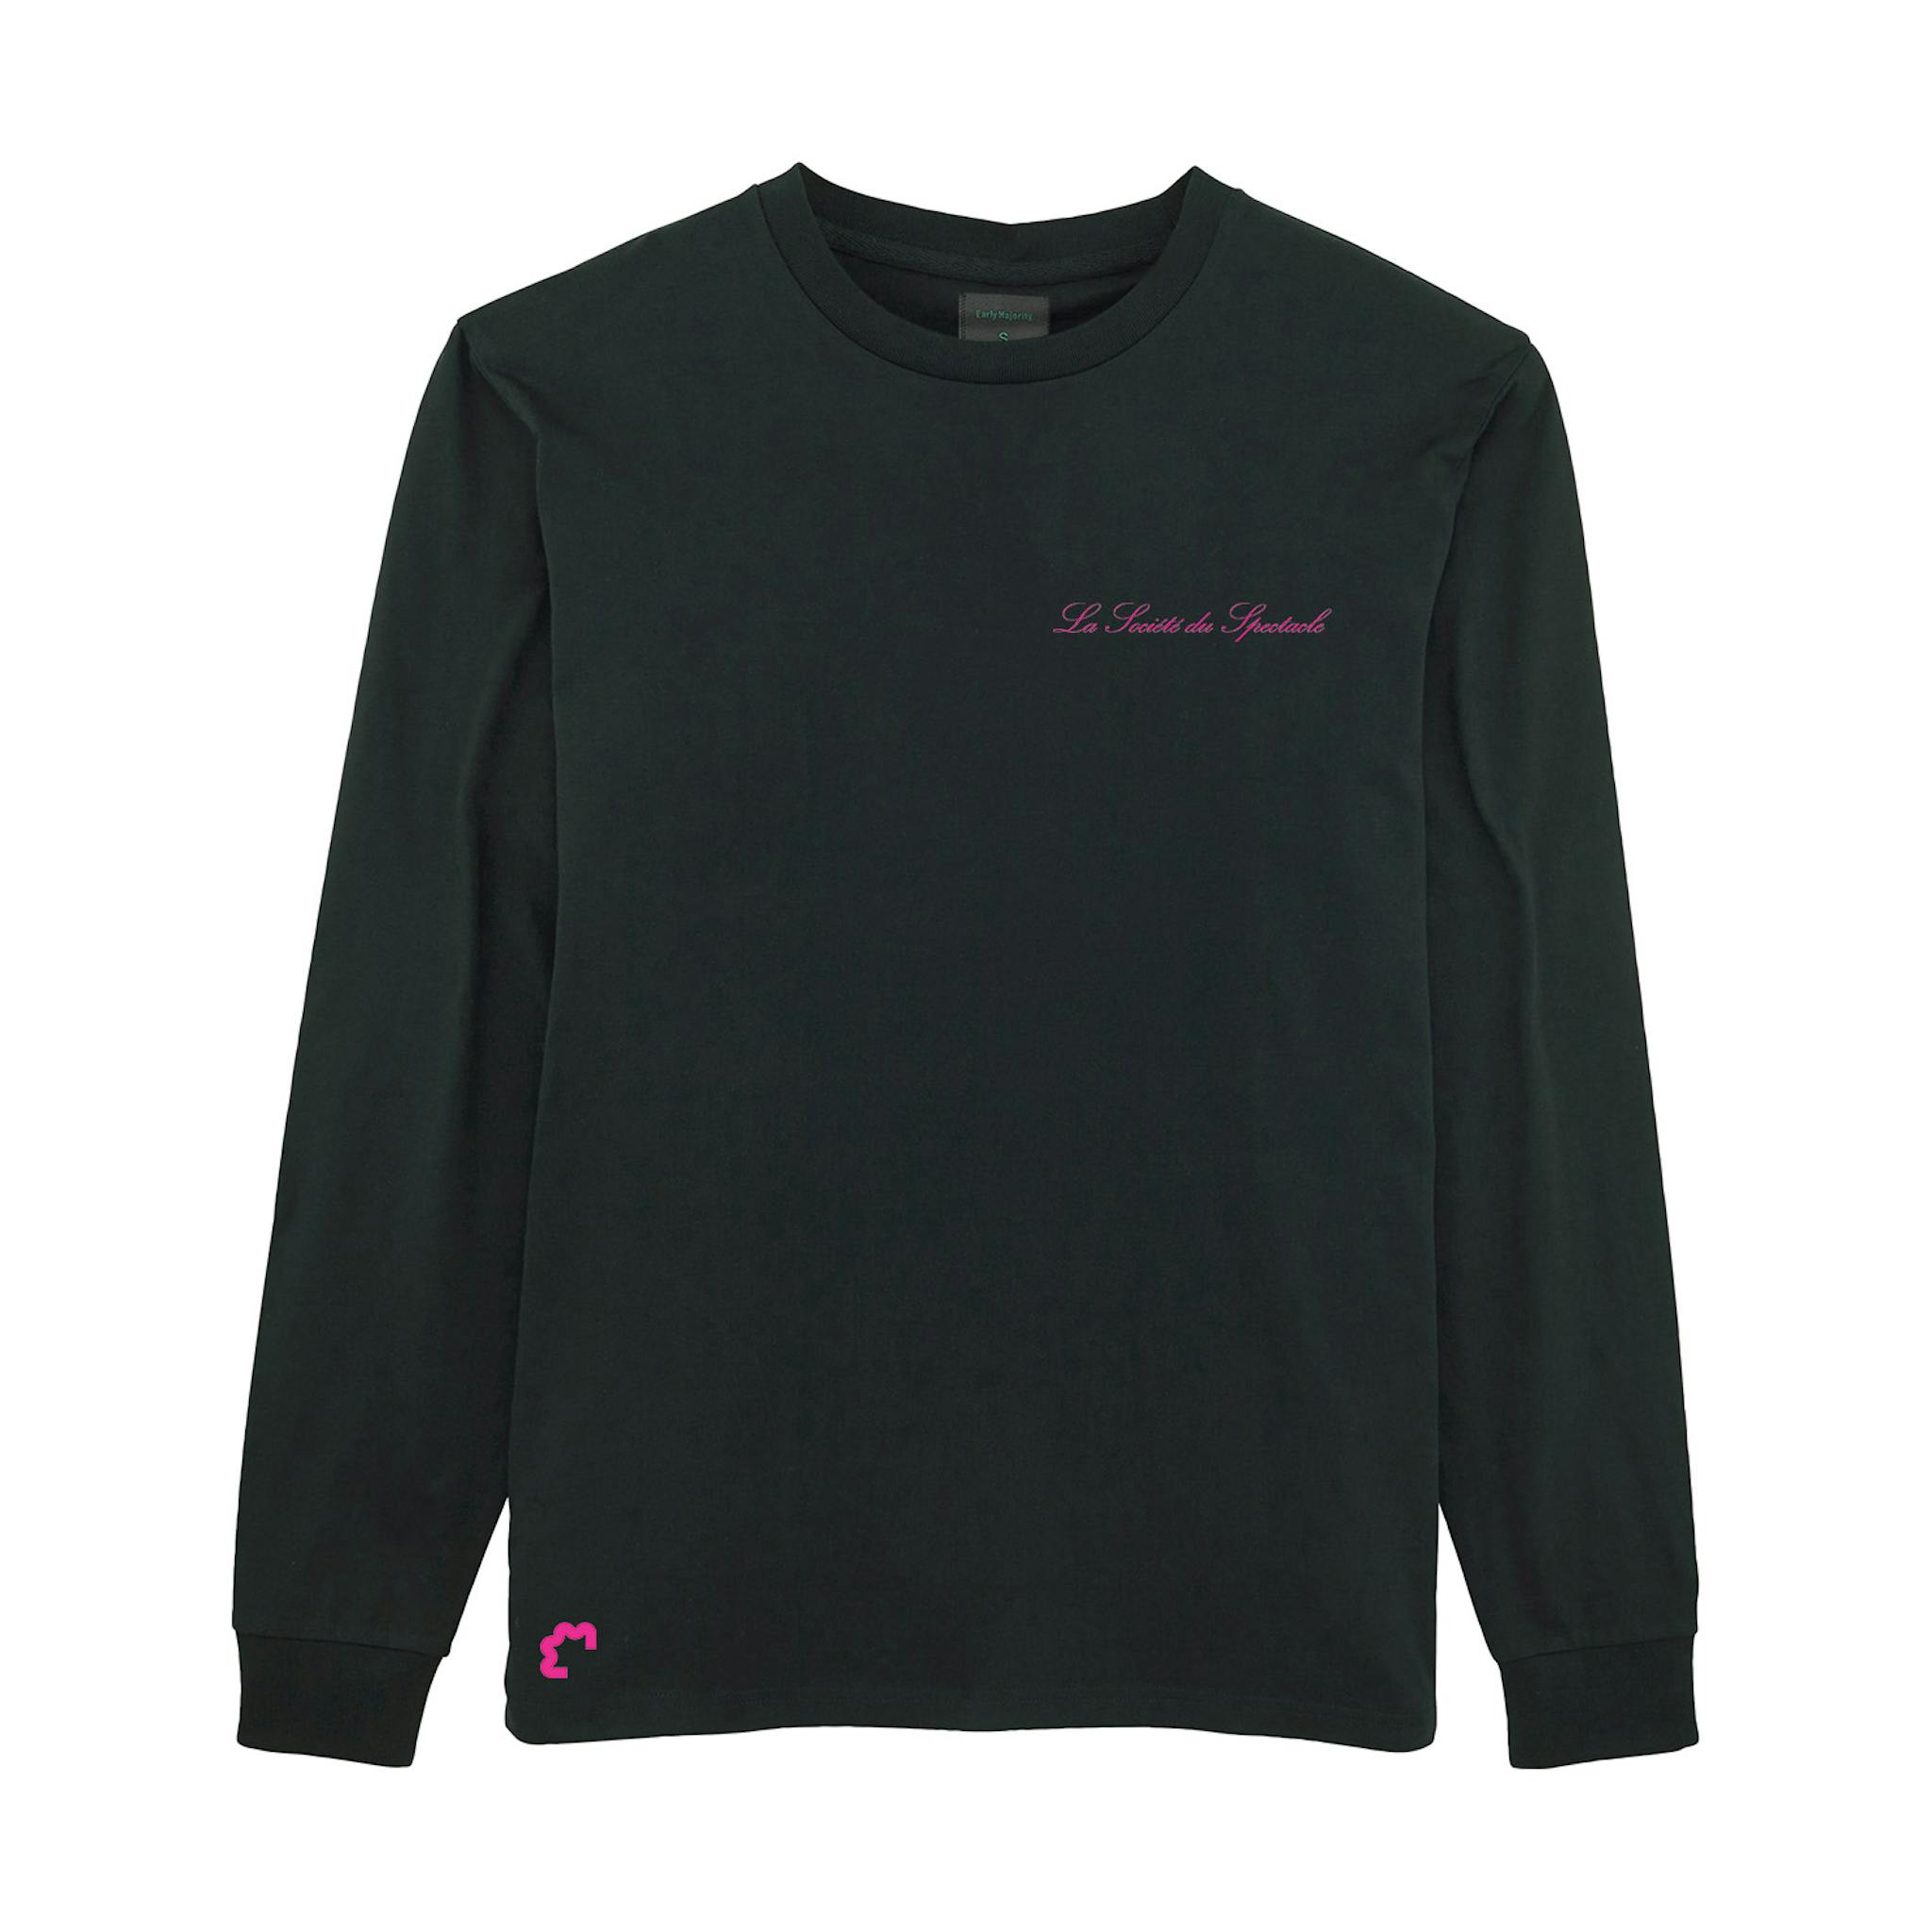 A black long-sleeve T-shirt with small pink text on the chest.